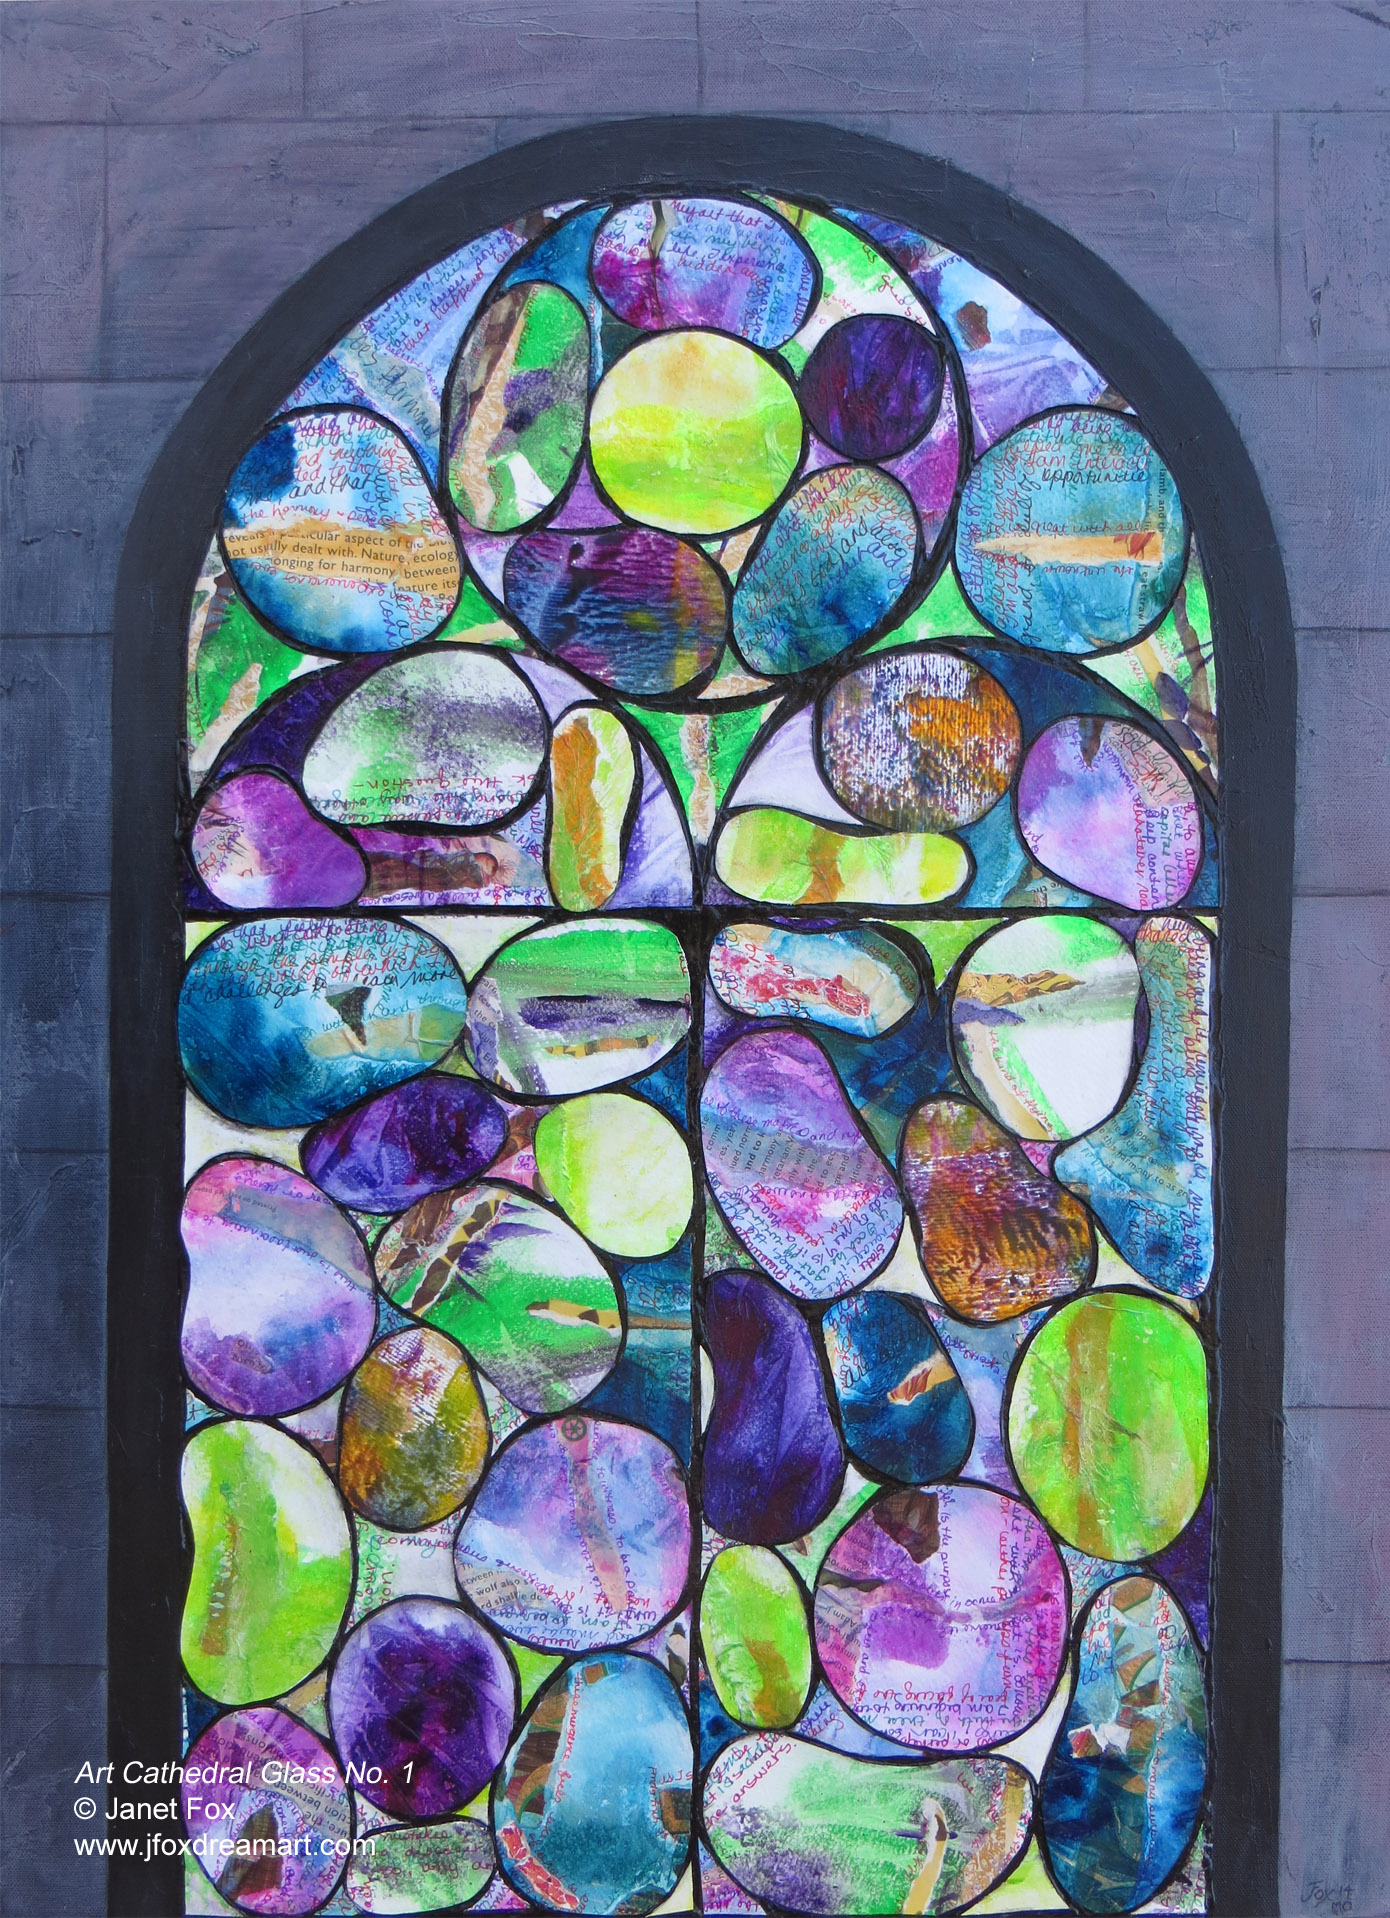 Image of a mixed media painting by Janet Fox titled "Art Cathedral Glass No. 1."